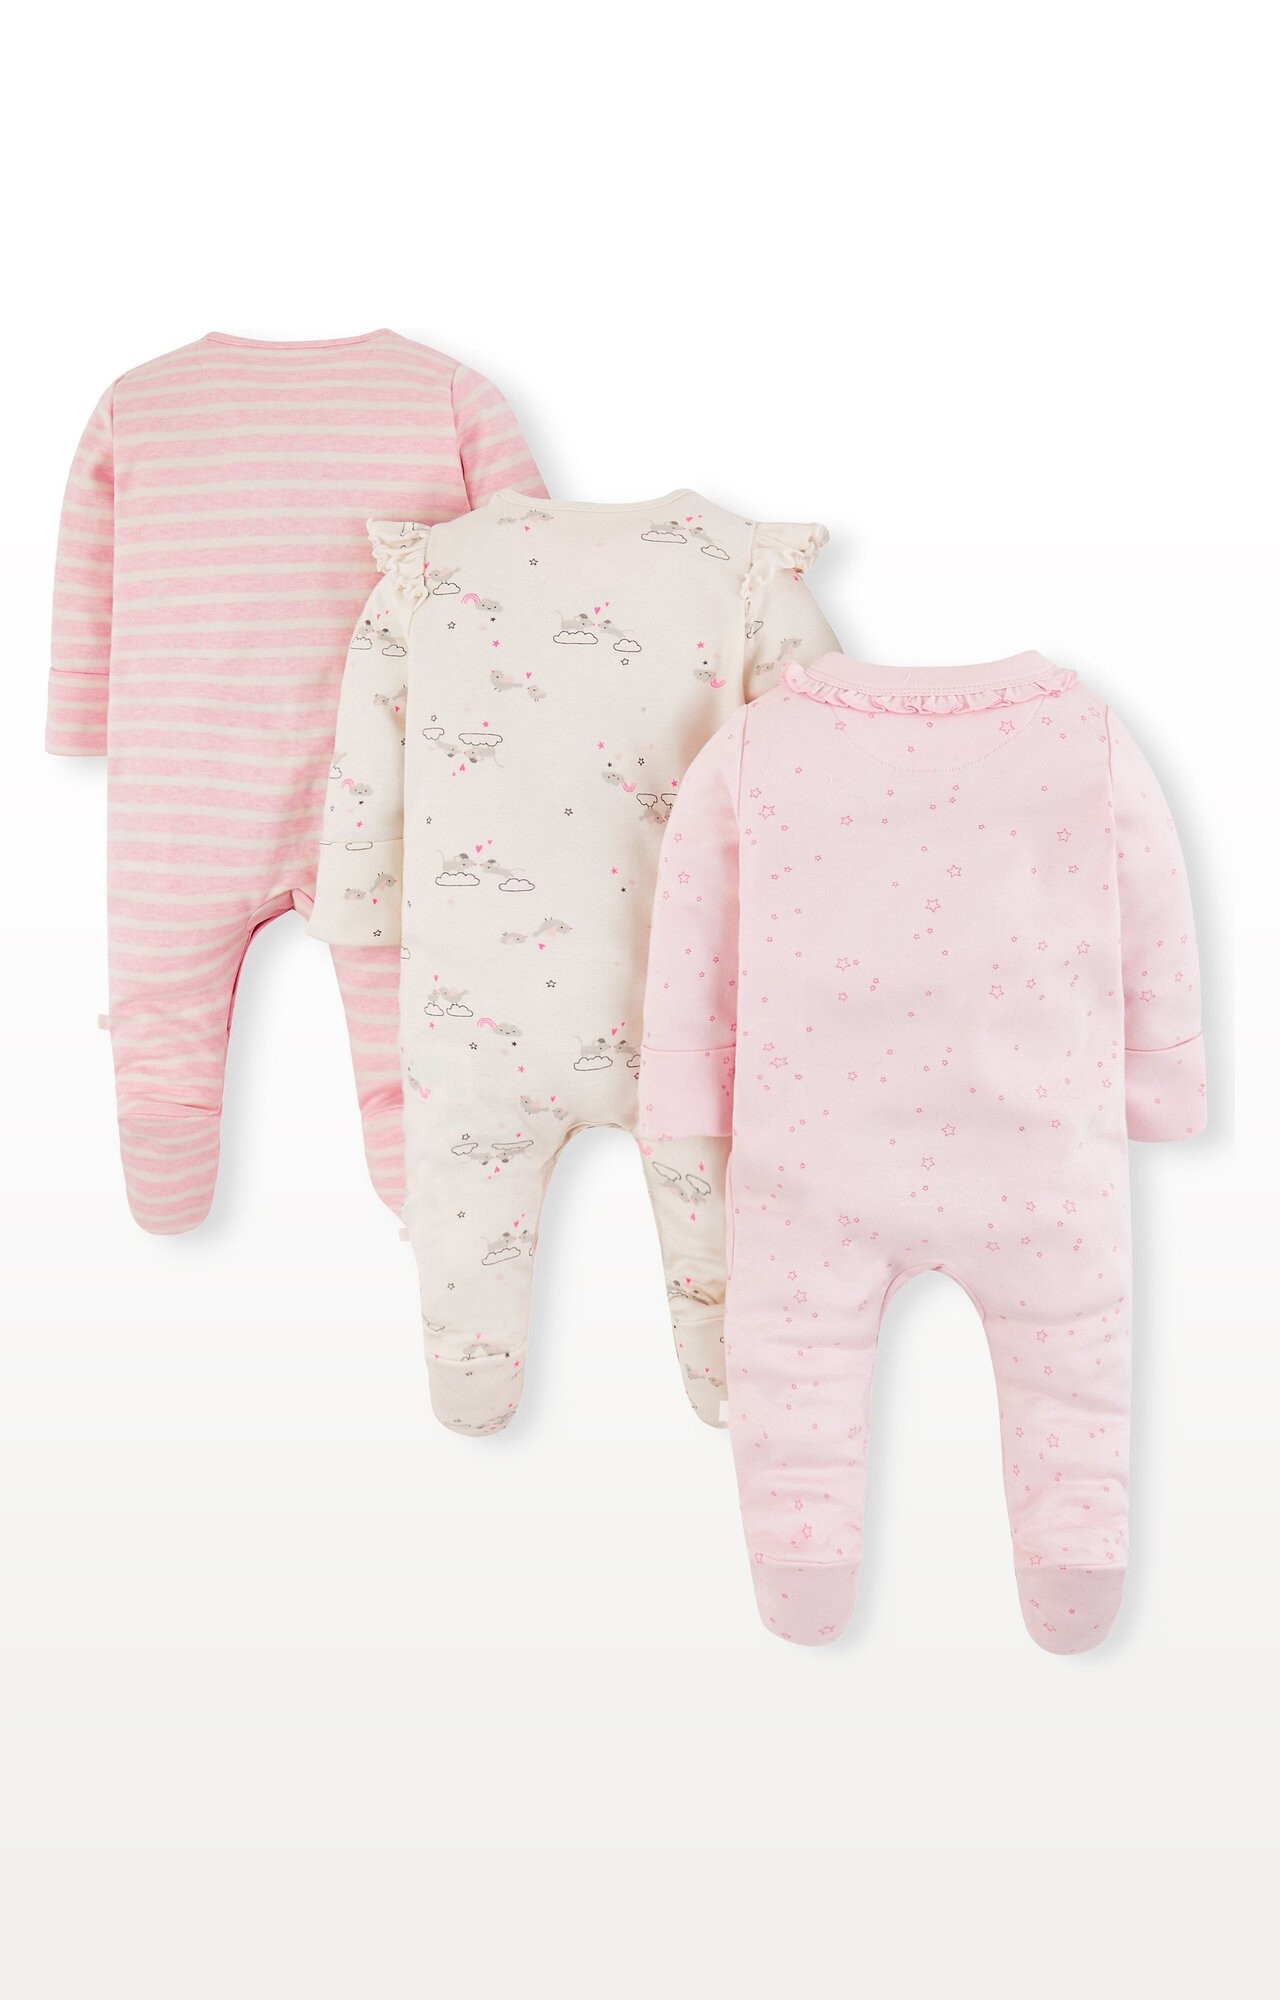 Mothercare | Mummy and Daddy Sleepsuits - Pack of 3 1